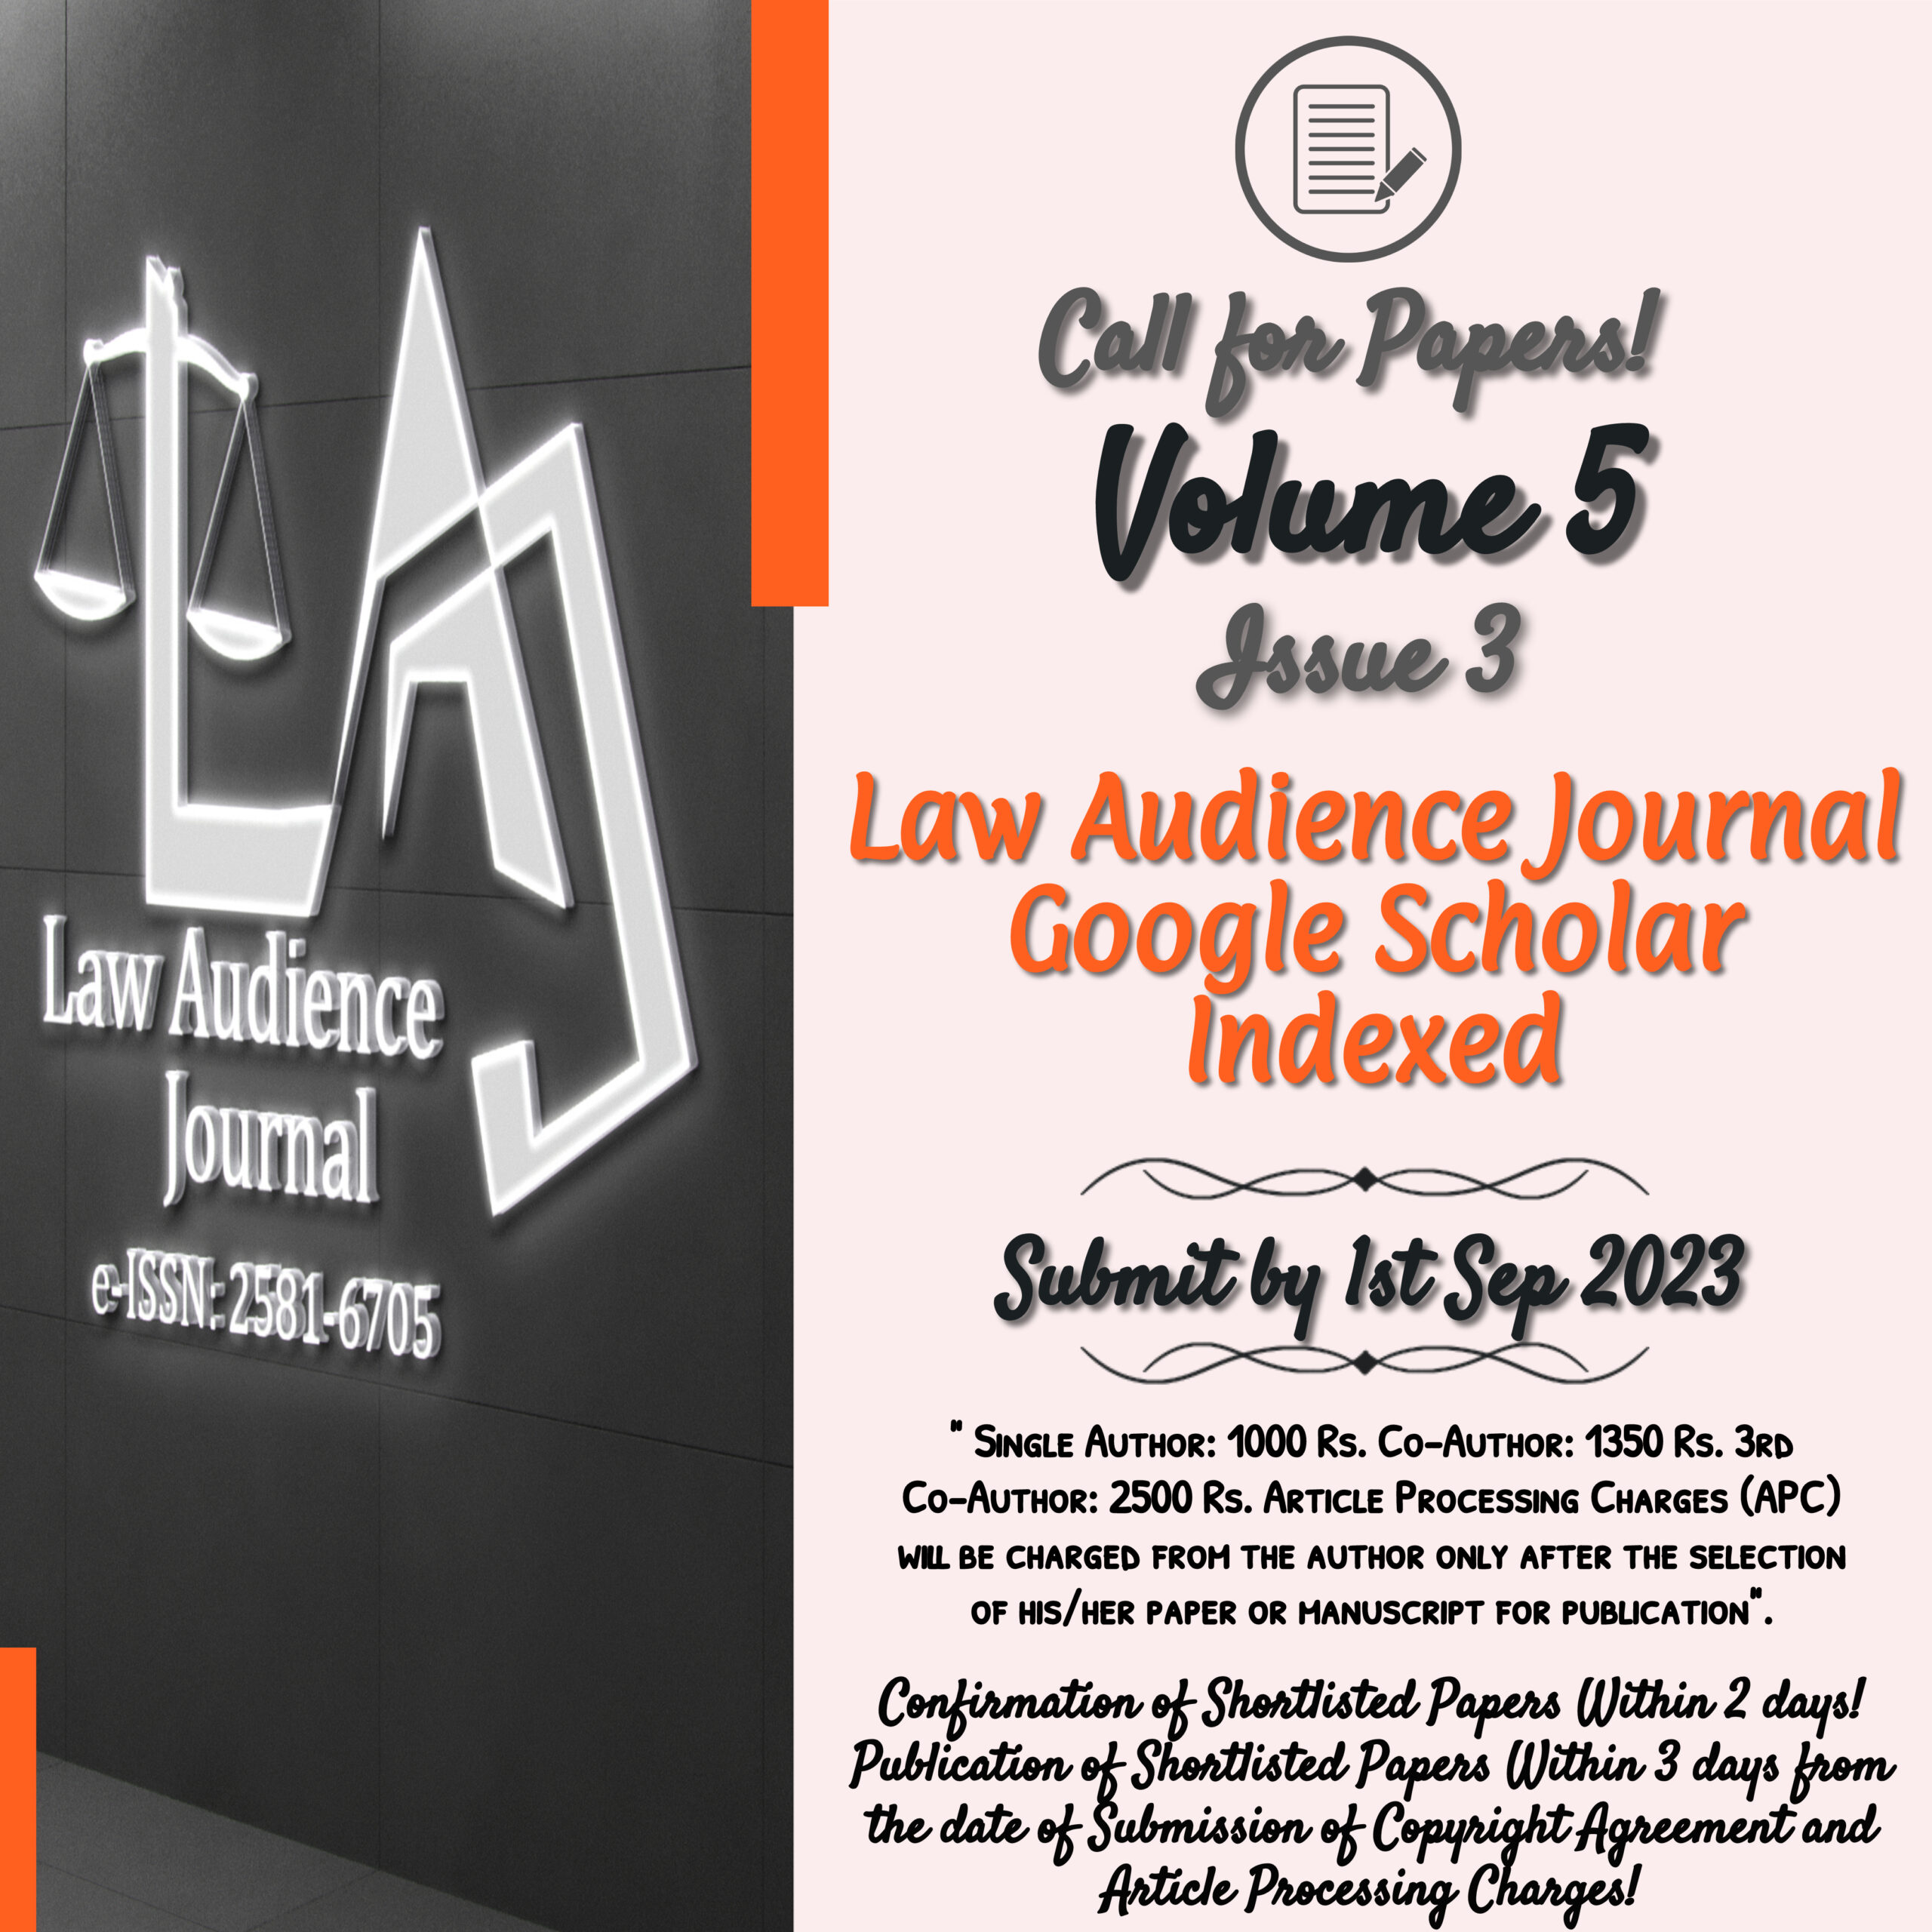 You are currently viewing Call For Papers: Law Audience Journal: [Volume.5, Issue 3 (Issue No. 24), e-ISSN: 2581-6705, Indexed In 12+ Databases Including Google Scholar, Impact Factor 5.497, Publication in 3 Days: Submit By 1st Sep 2023